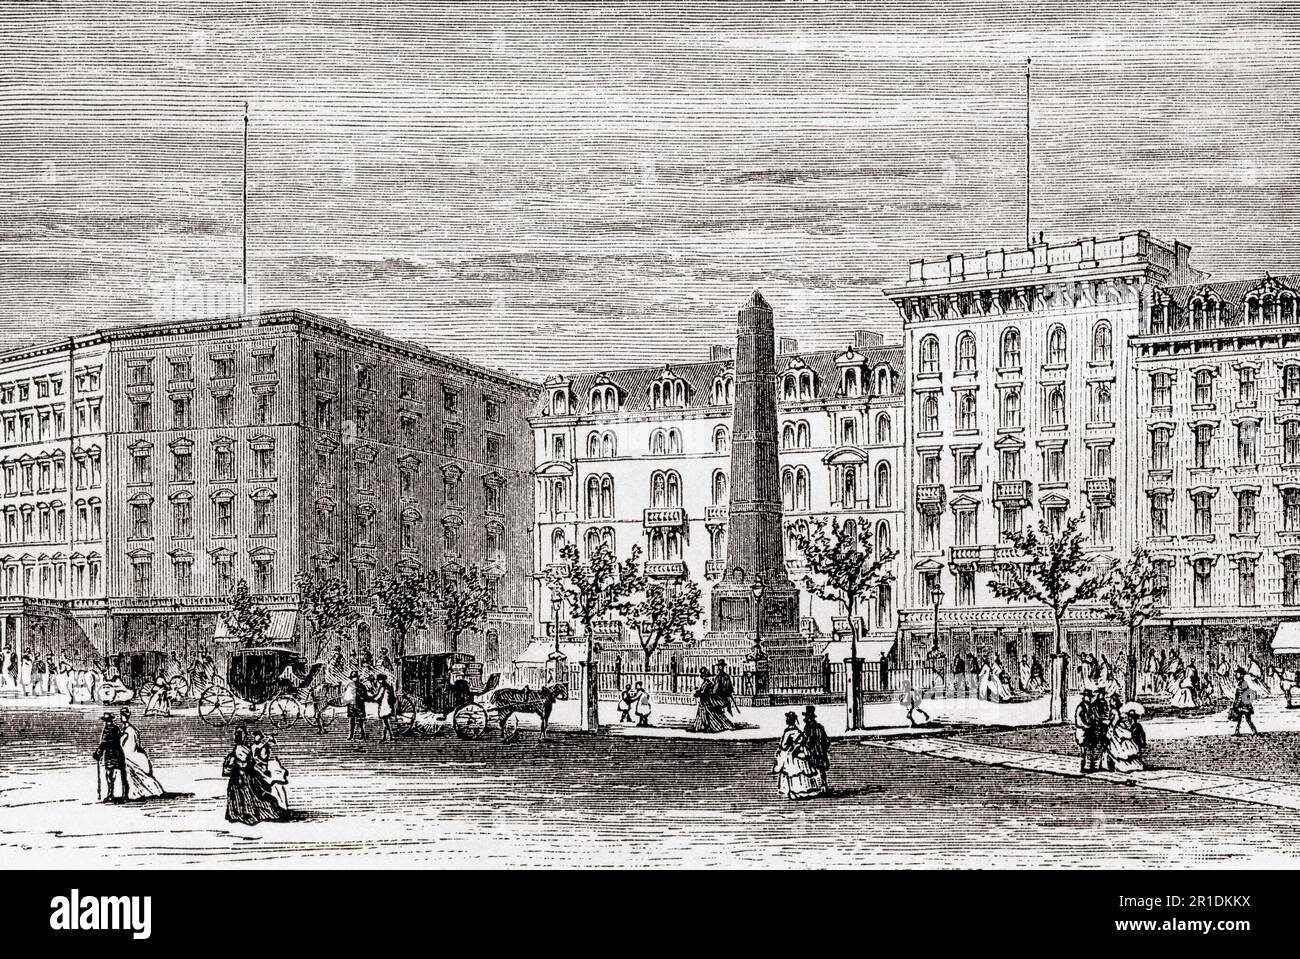 The Fifth Avenue Hotel, 200 Fifth Avenue in Manhattan, New York City, USA, built in 1859 it was demolished in 1908.  From America Revisited: From The Bay of New York to The Gulf of Mexico, published 1886. Stock Photo